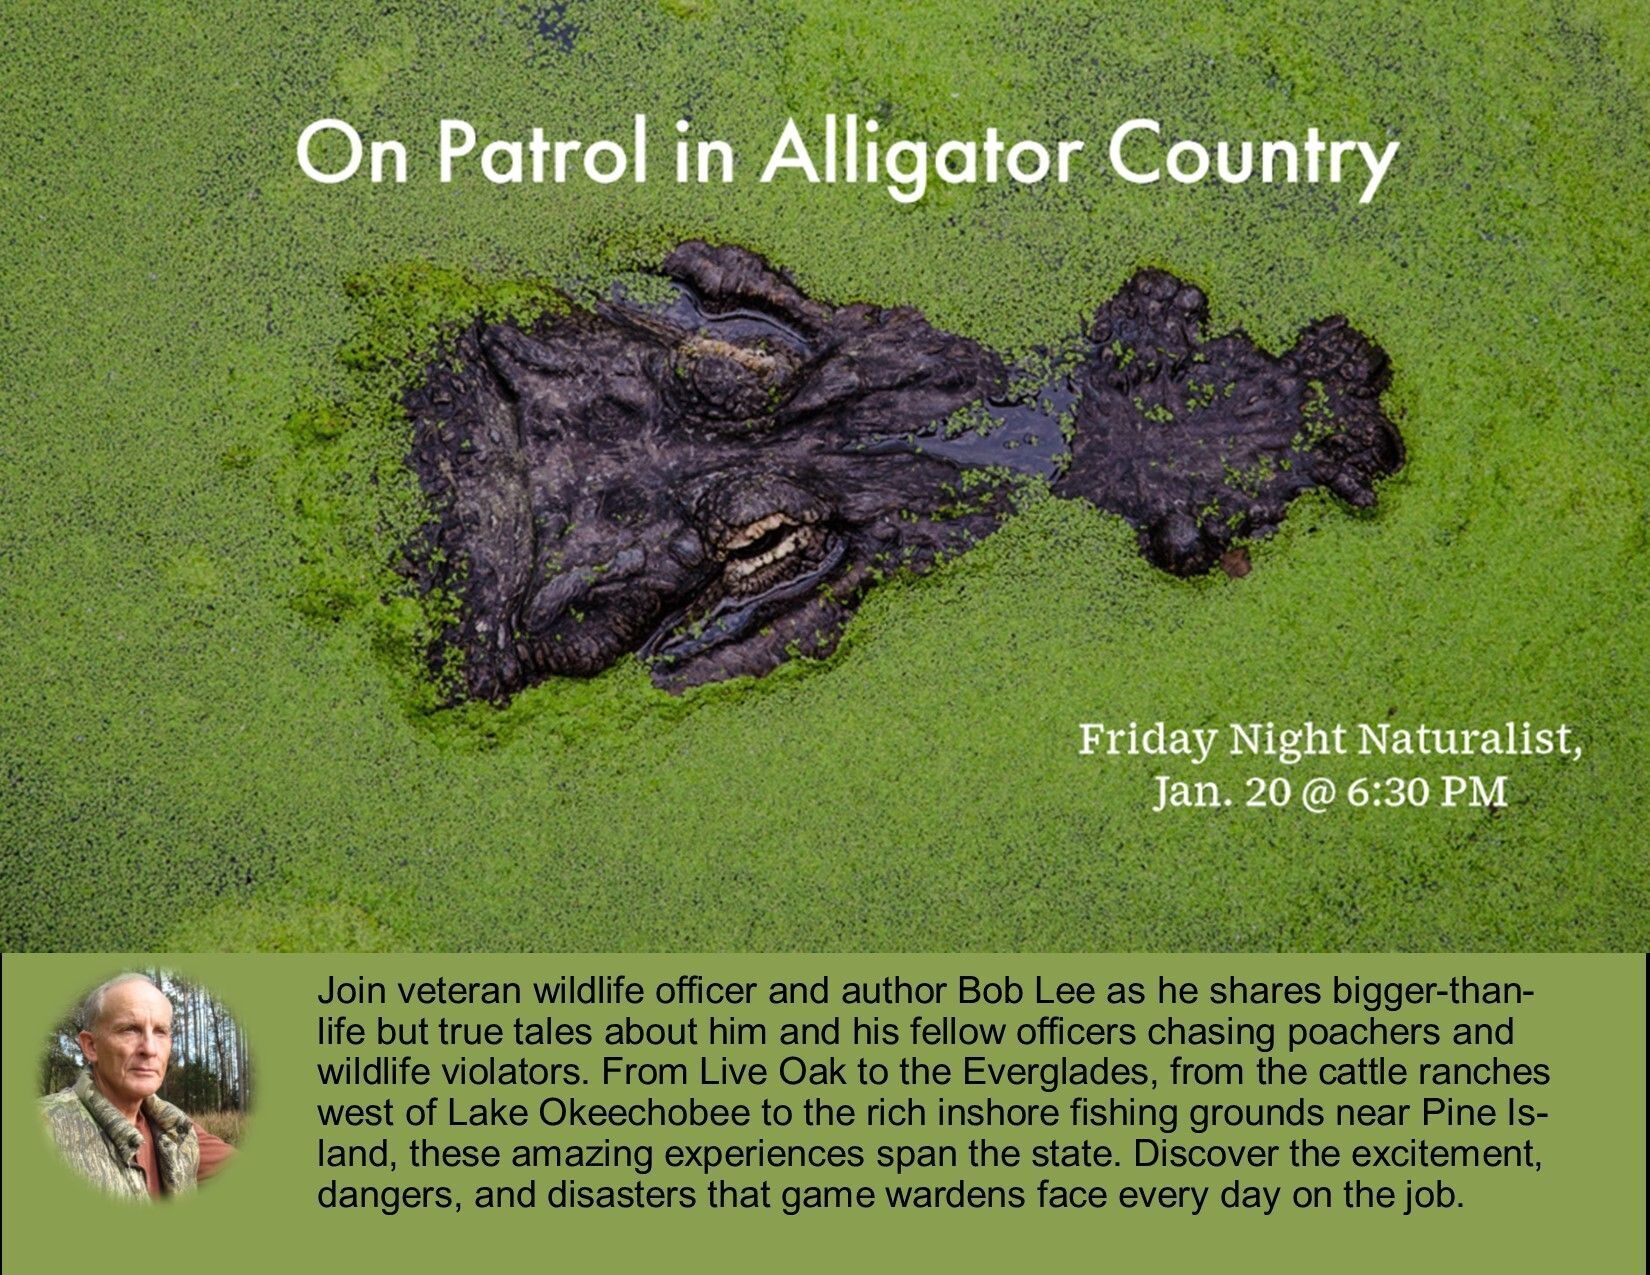 Photo of gator head floating in pond weed with text about event